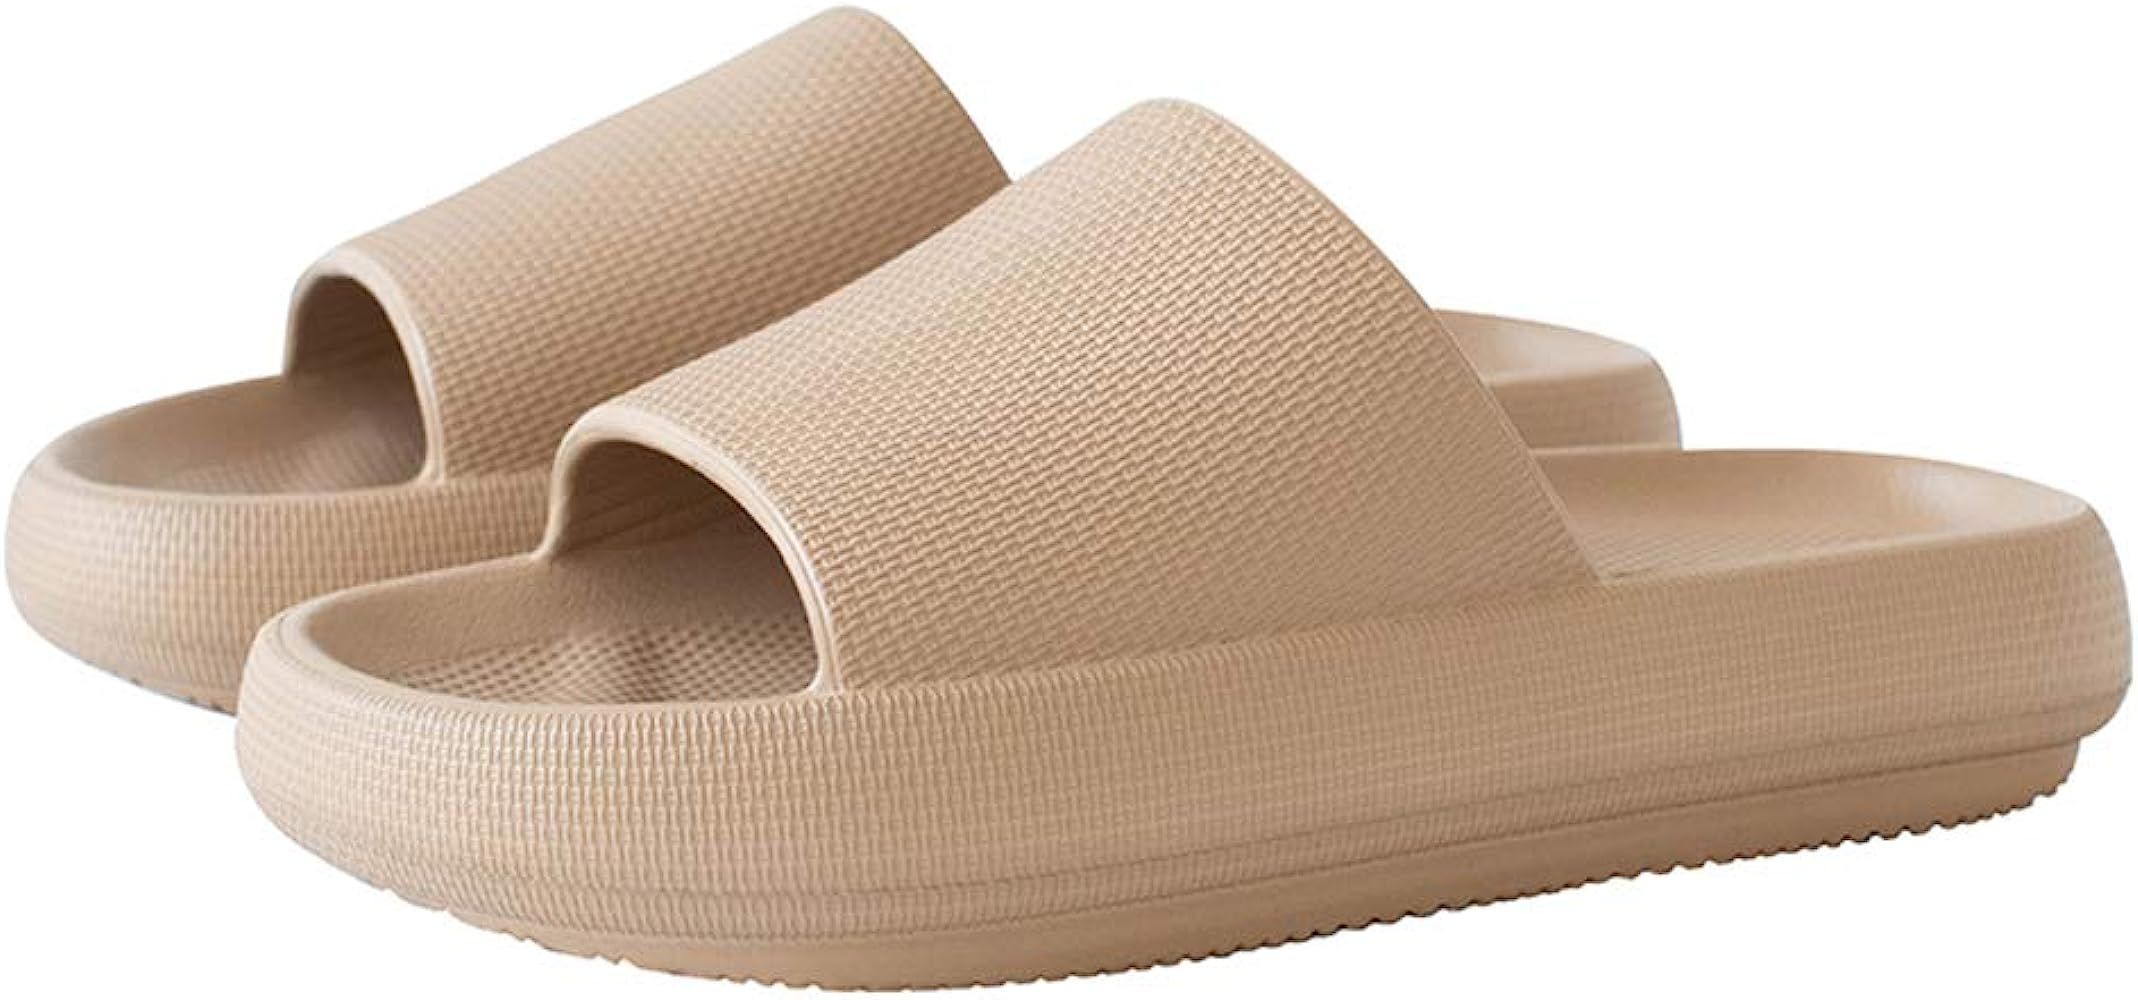 Slippers for Women and Men Shower Quick Drying Bathroom Sandals Open Toe Soft Cushioned Extra Thi... | Amazon (US)